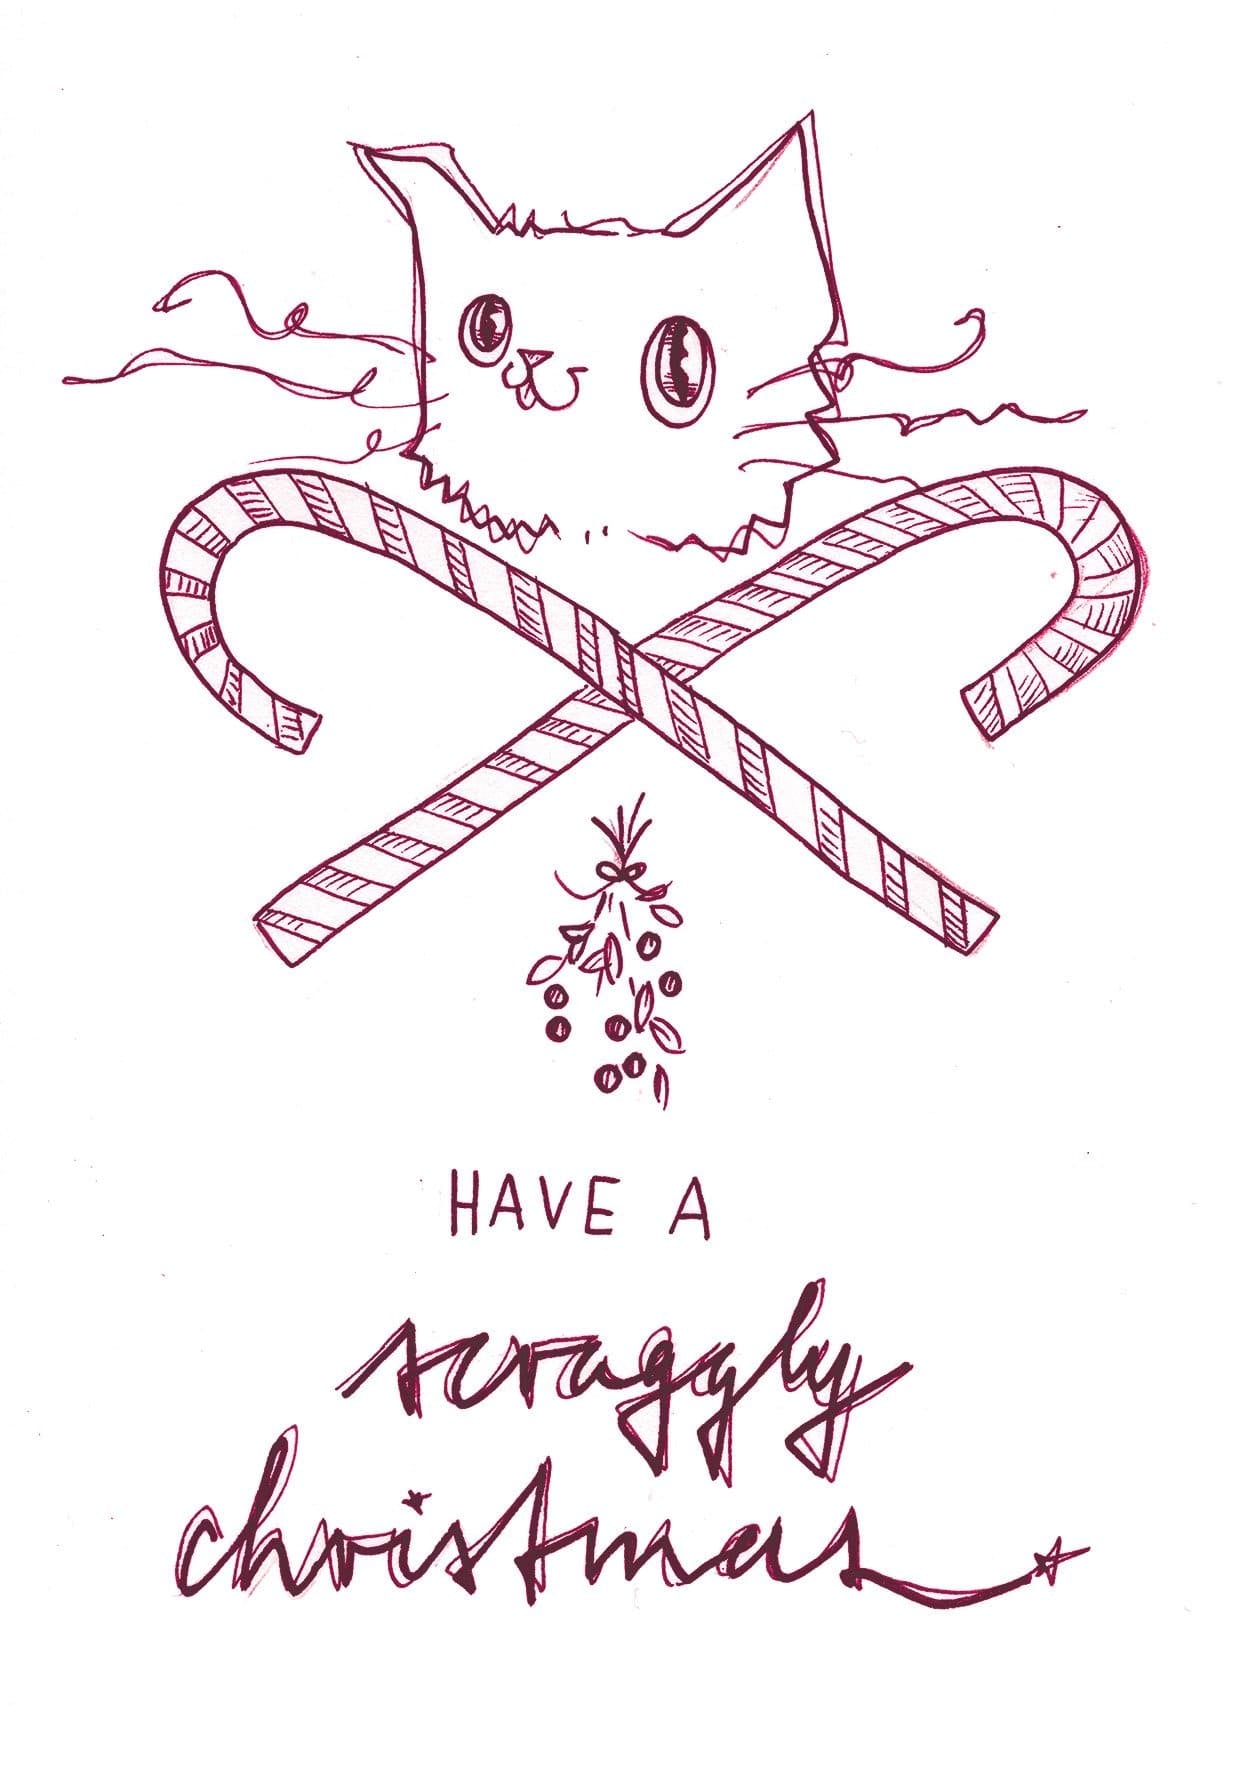 Have A Scraggly Christmas Greeting Card